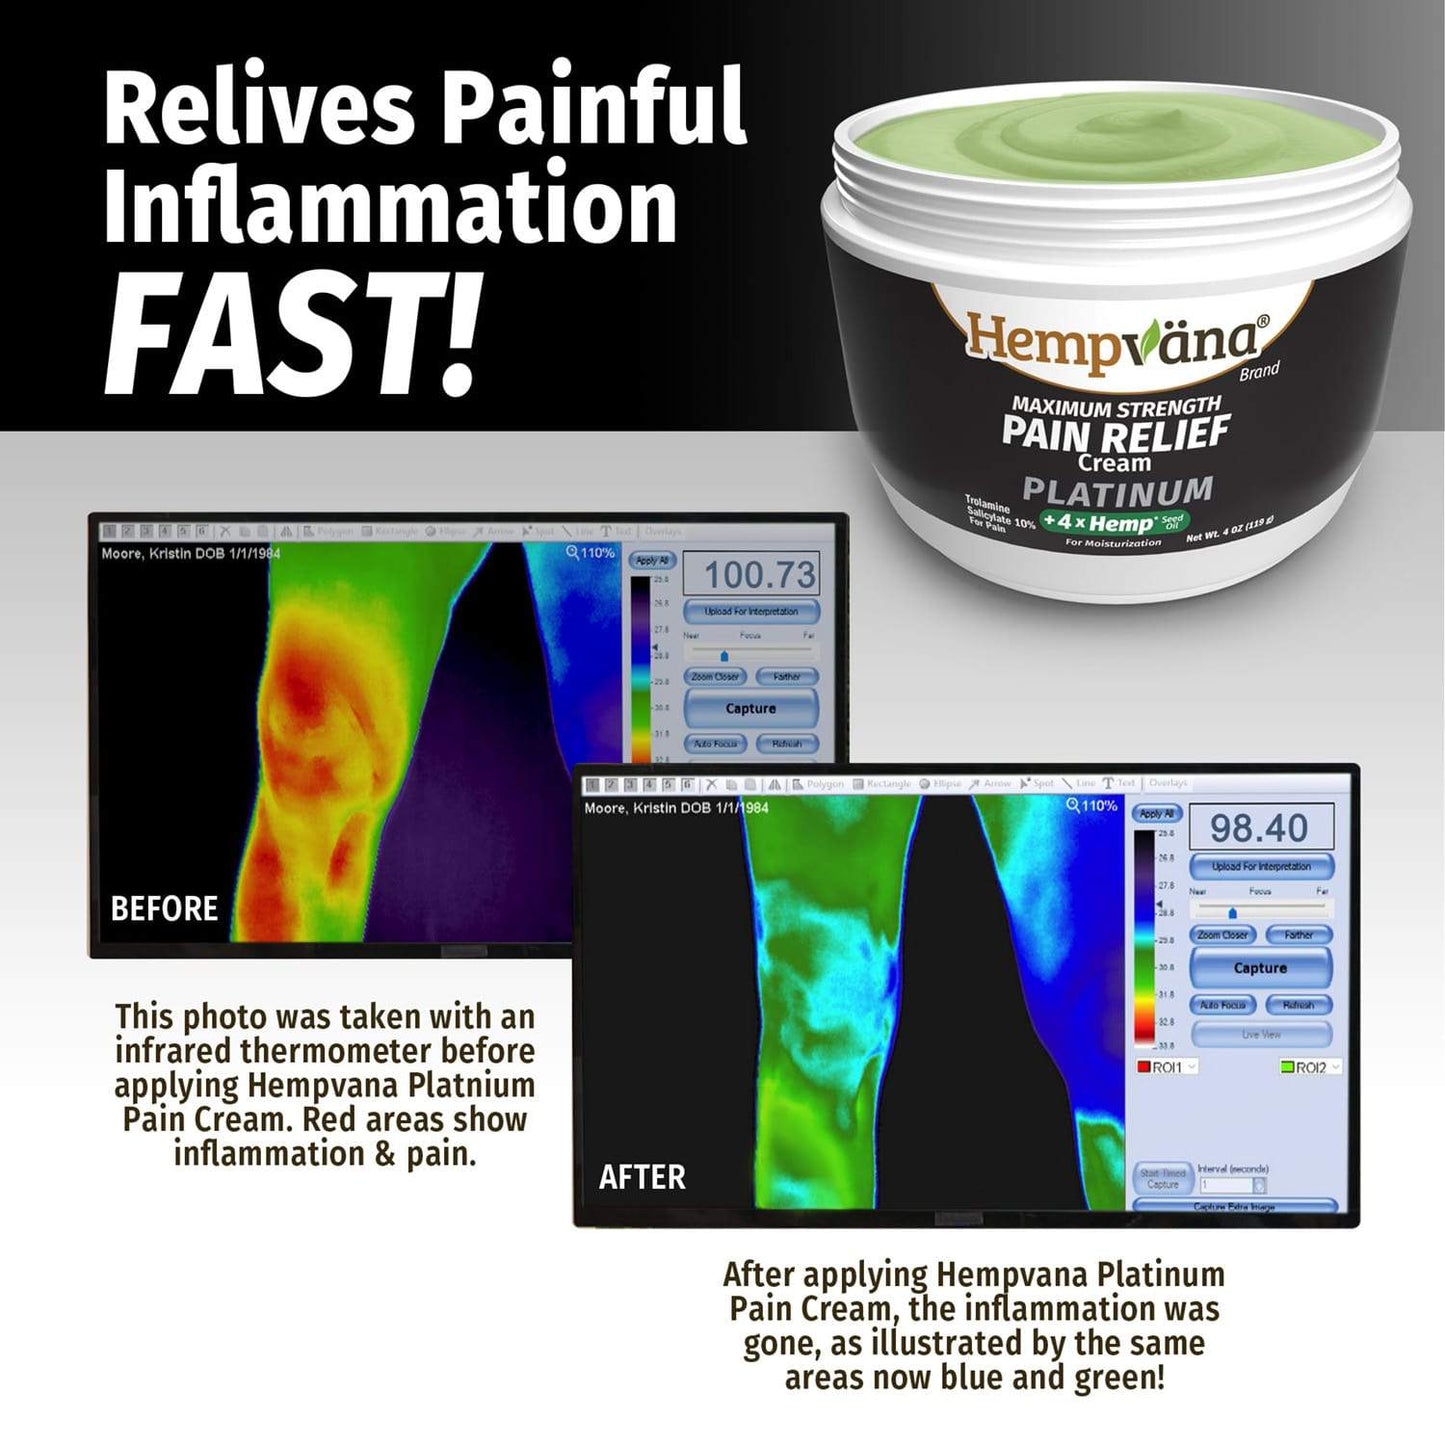 Relief painful inflammation fast! Shows Platinum Pain Relief Jar and before infrared thermometer photo with red areas shows inflammation and pain and after showing blue and green for relief